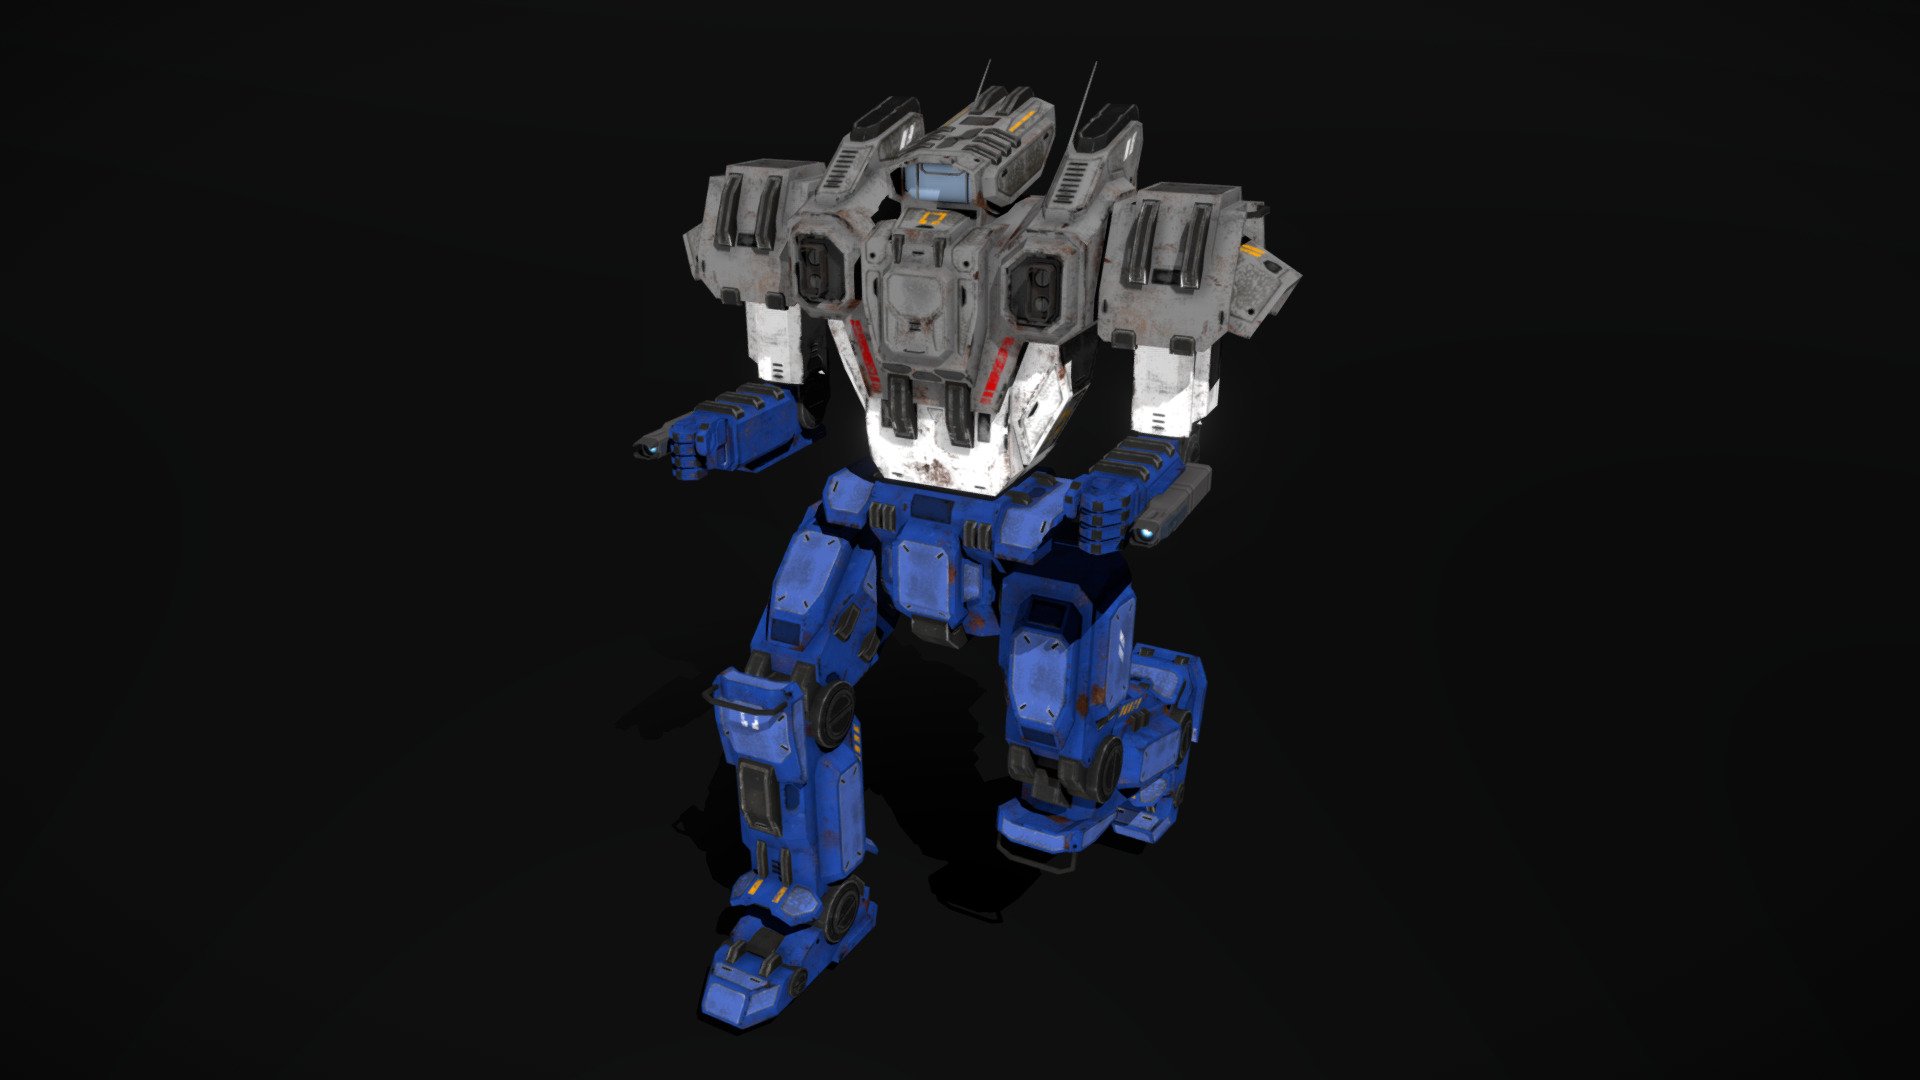 This is a model of a low-poly and game-ready scifi mech. 


30+ animations (in place + root motion)
Non-humanoid Skeleton with 19 bones
Modular weapon design
Canons, lasers, MGs, long- and short-range-missile launchers
2 missiles, 2 projectiles
34 decals
Arms are destructible (can be blown off)
Hands have no bones and are not animated
Hands are optional and can be removed/replaced with weapons
5 different texture sets
PSDs with intact layers are included

The weapons are separate meshes and can be animated with a keyframe animation tool. The weapon loadout can be changed as well.

Please note: The textures in the Sketchfab viewer have a reduced resolution to improve Sketchfab loading speed.

If you have bought this model please make sure to download the “additional file”.  It contains FBX meshes, full resolution textures and the source PSDs with intact layers. The meshes are separate and can be animated (e.g. firing animations for gun barrels) 3d model